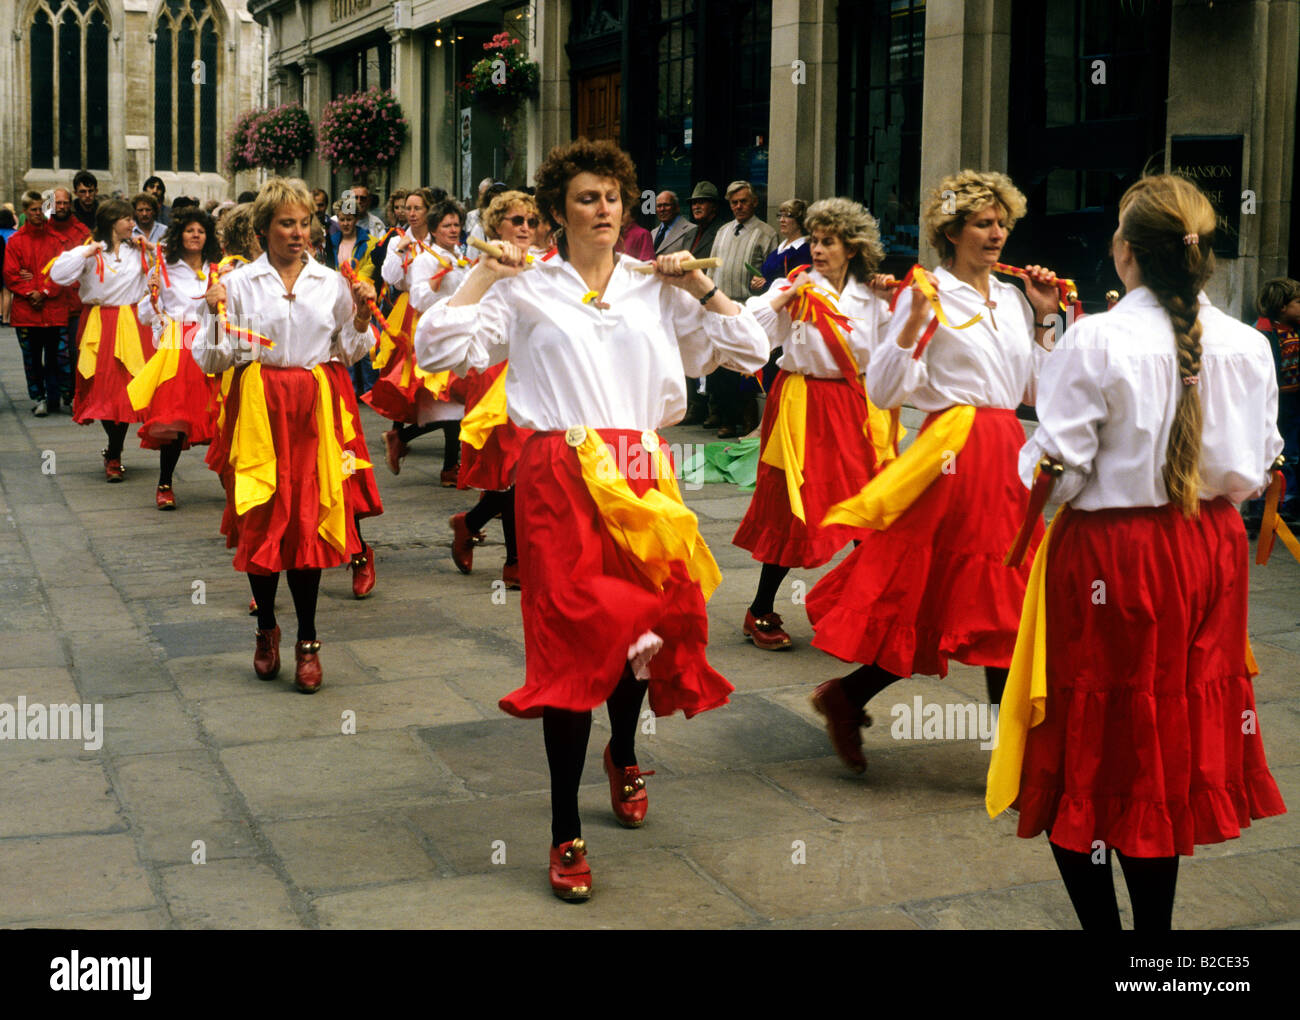 Women Ladies clog dancing dance red skirts York street dance entertainment performers Yorkshire England English tradition Stock Photo